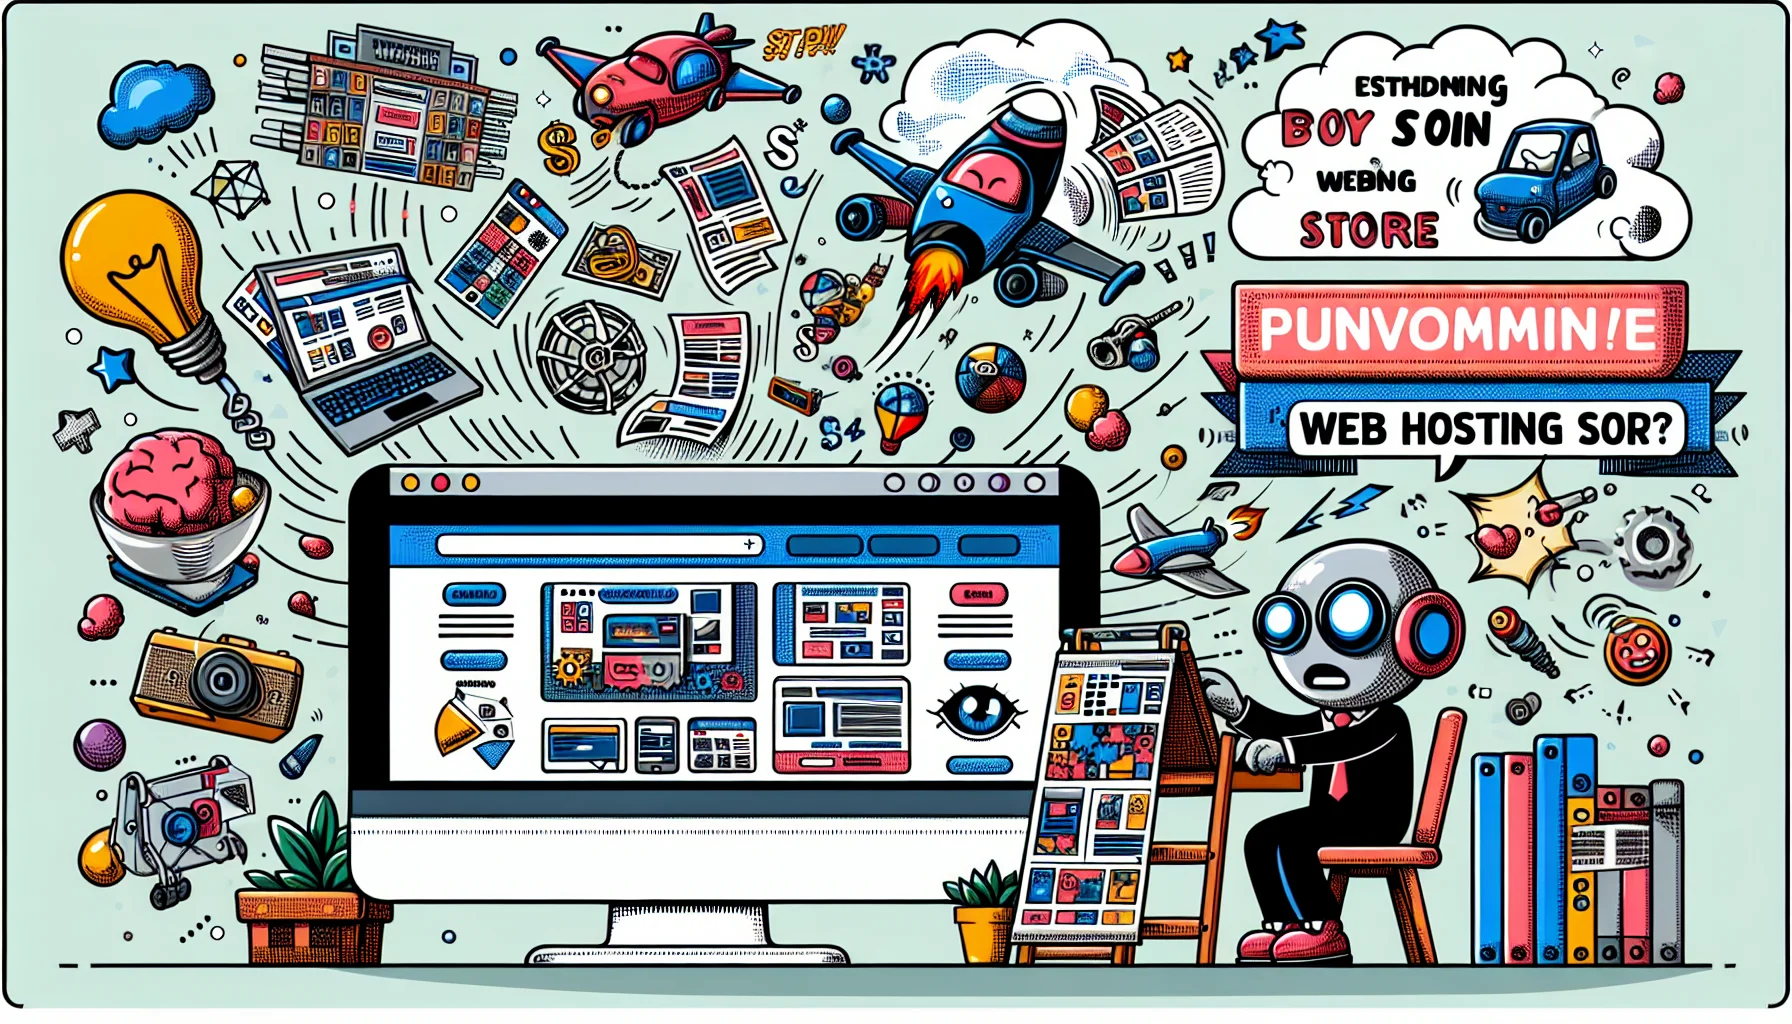 Illustrate a comic scene featuring an AI-powered eCommerce website builder. It humorously experiments with various designs and templates to build an online store, with items flying into place from all corners of the screen. Nearby sits a persuasive banner marketing web hosting services, decorated with humorous catchphrases and playful icons. The entire scene evokes a sense of fun and creativity in the processes of website building and web hosting.